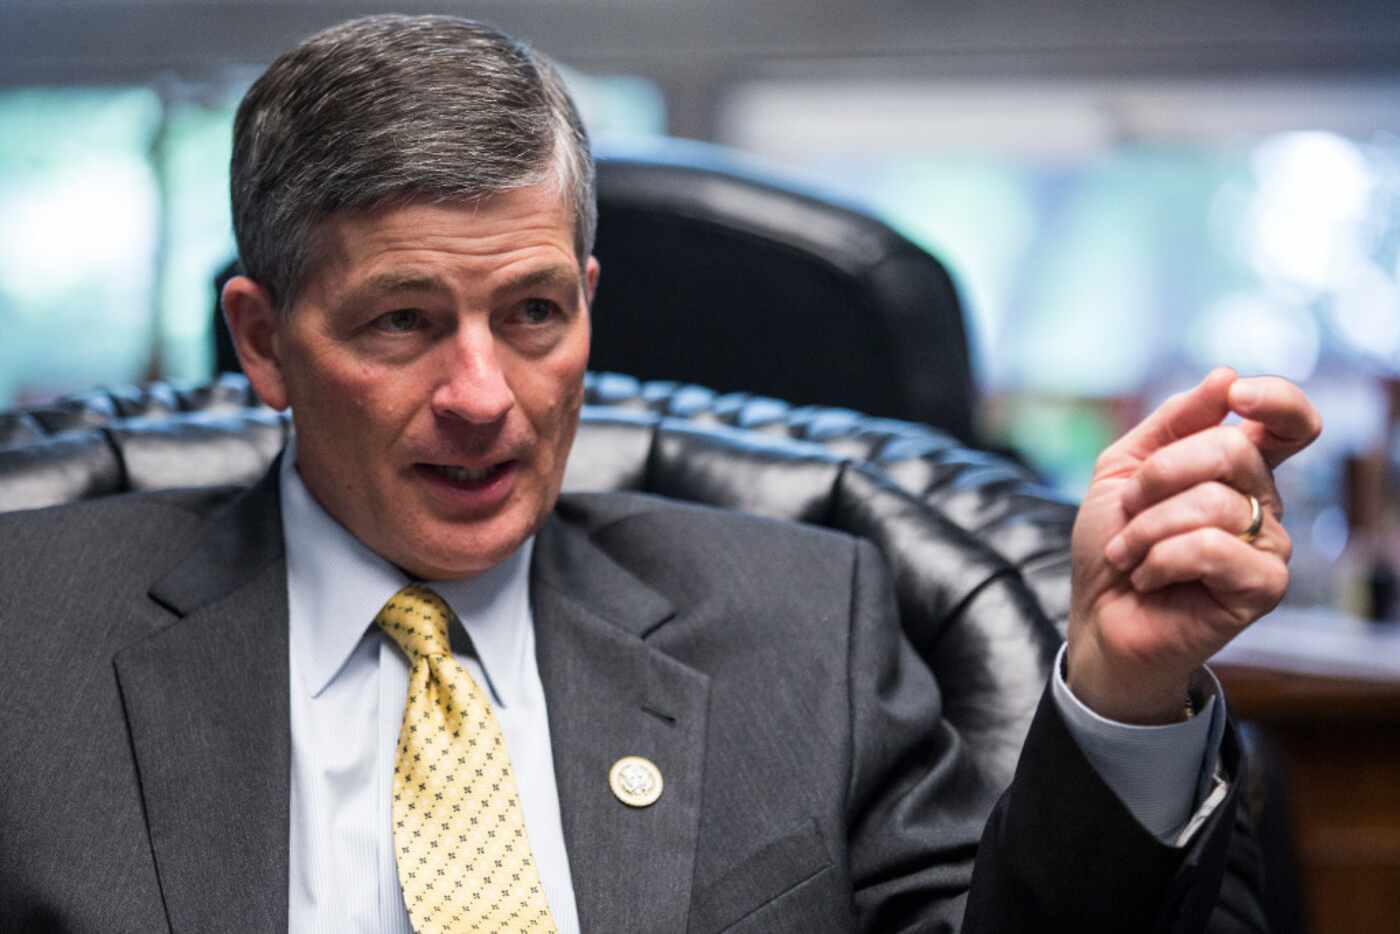 Rep. Jeb Hensarling, R-Dallas, said that "to have the government punish companies or banks...